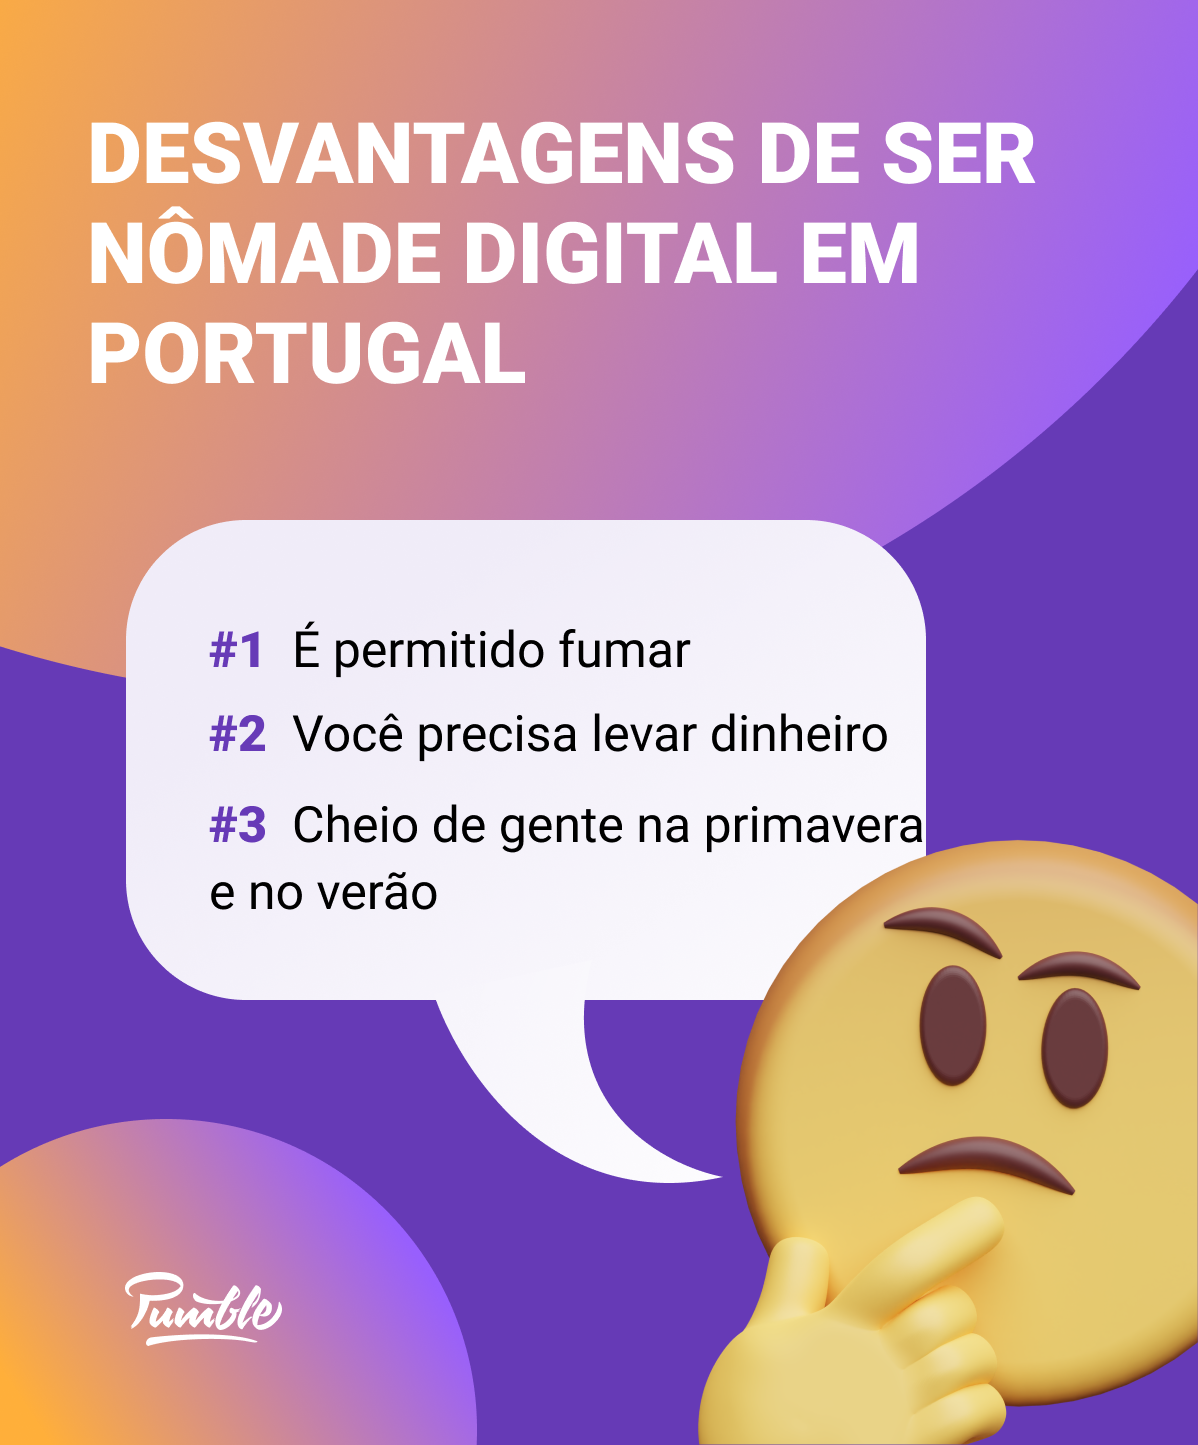 Drawbacks of being a digital nomad in Portugal